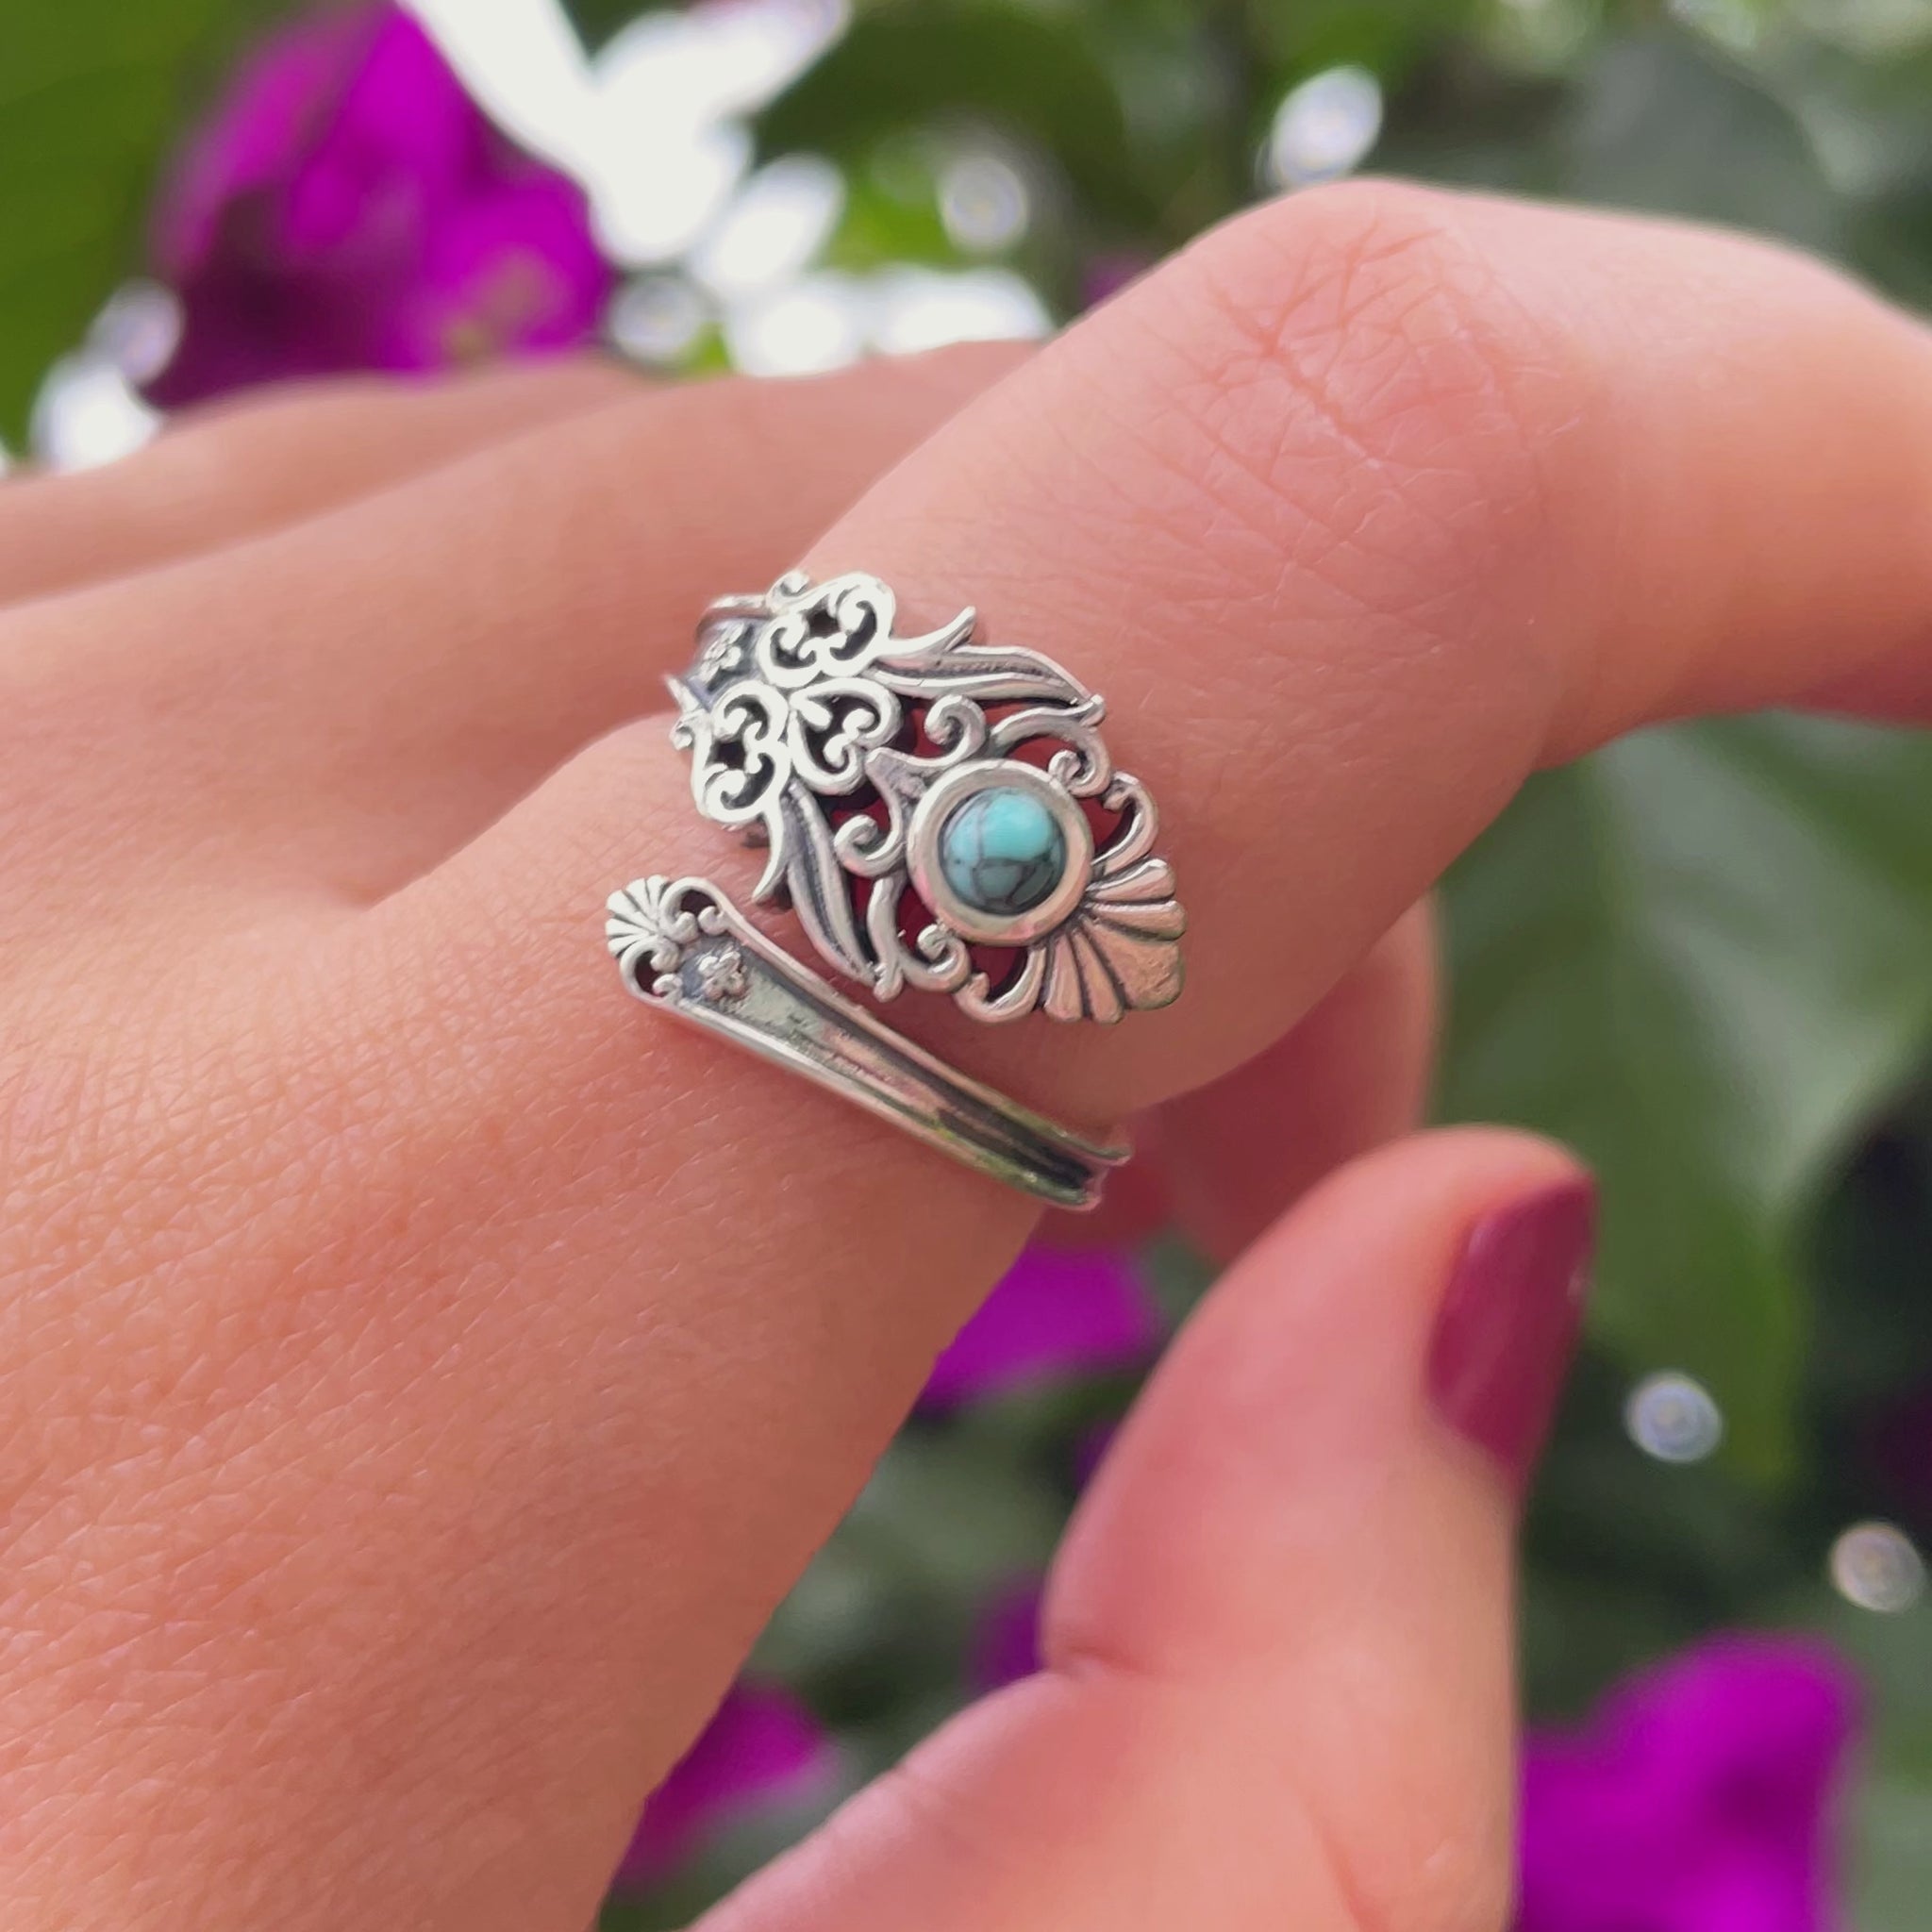 A close-up of a vintage turquoise spoon ring, with a smooth, curved silver band and a teardrop-shaped turquoise stone in the center.